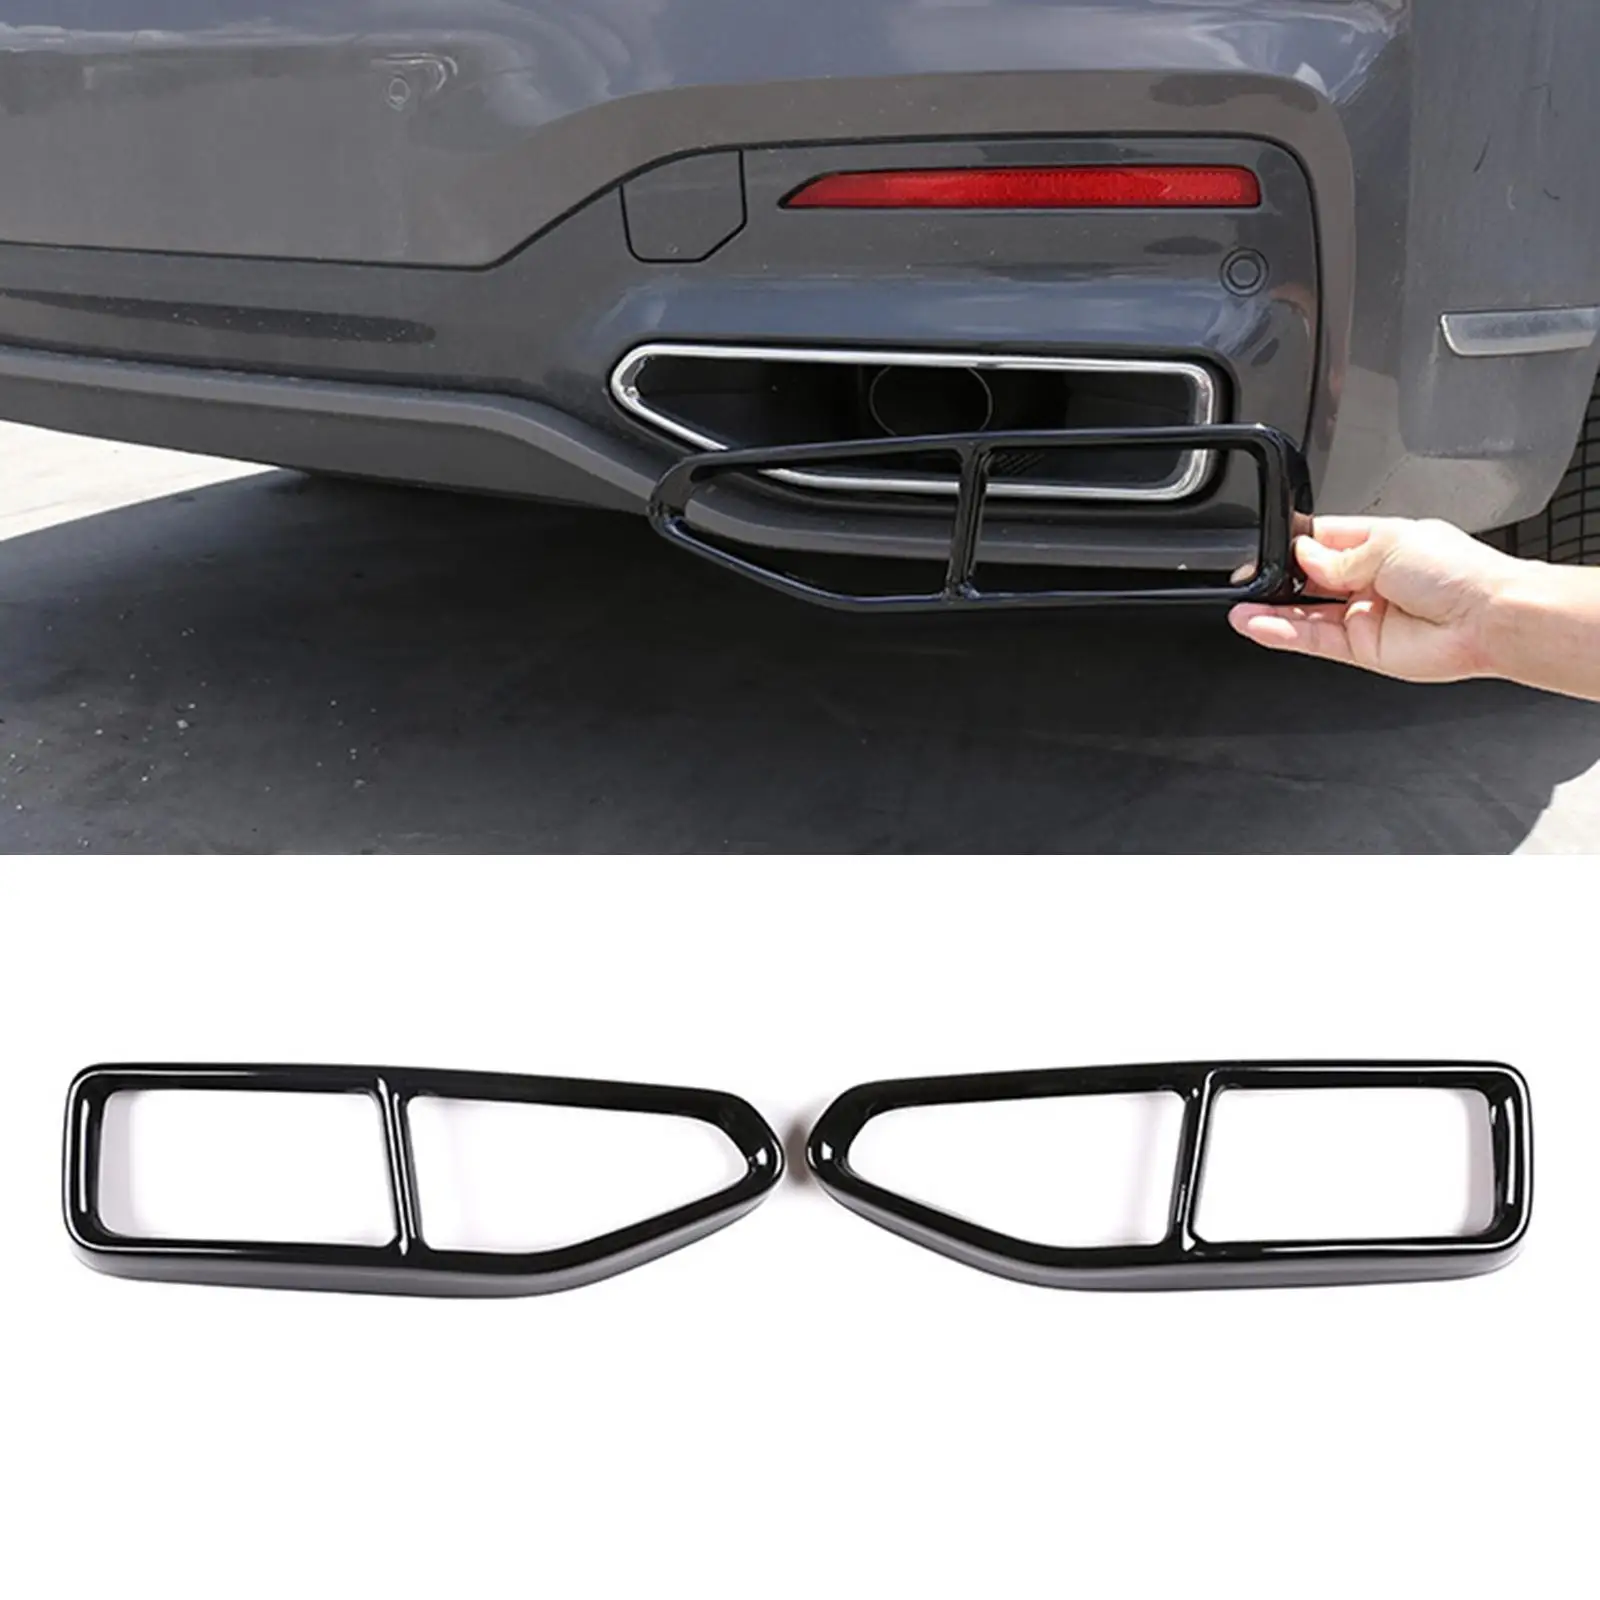 2x Stainless Steel Tailpipe Trim Frame Decoration Cover Rustproof Left Right Exhaust Pipe Output Cover for BMW 7 G11 G12